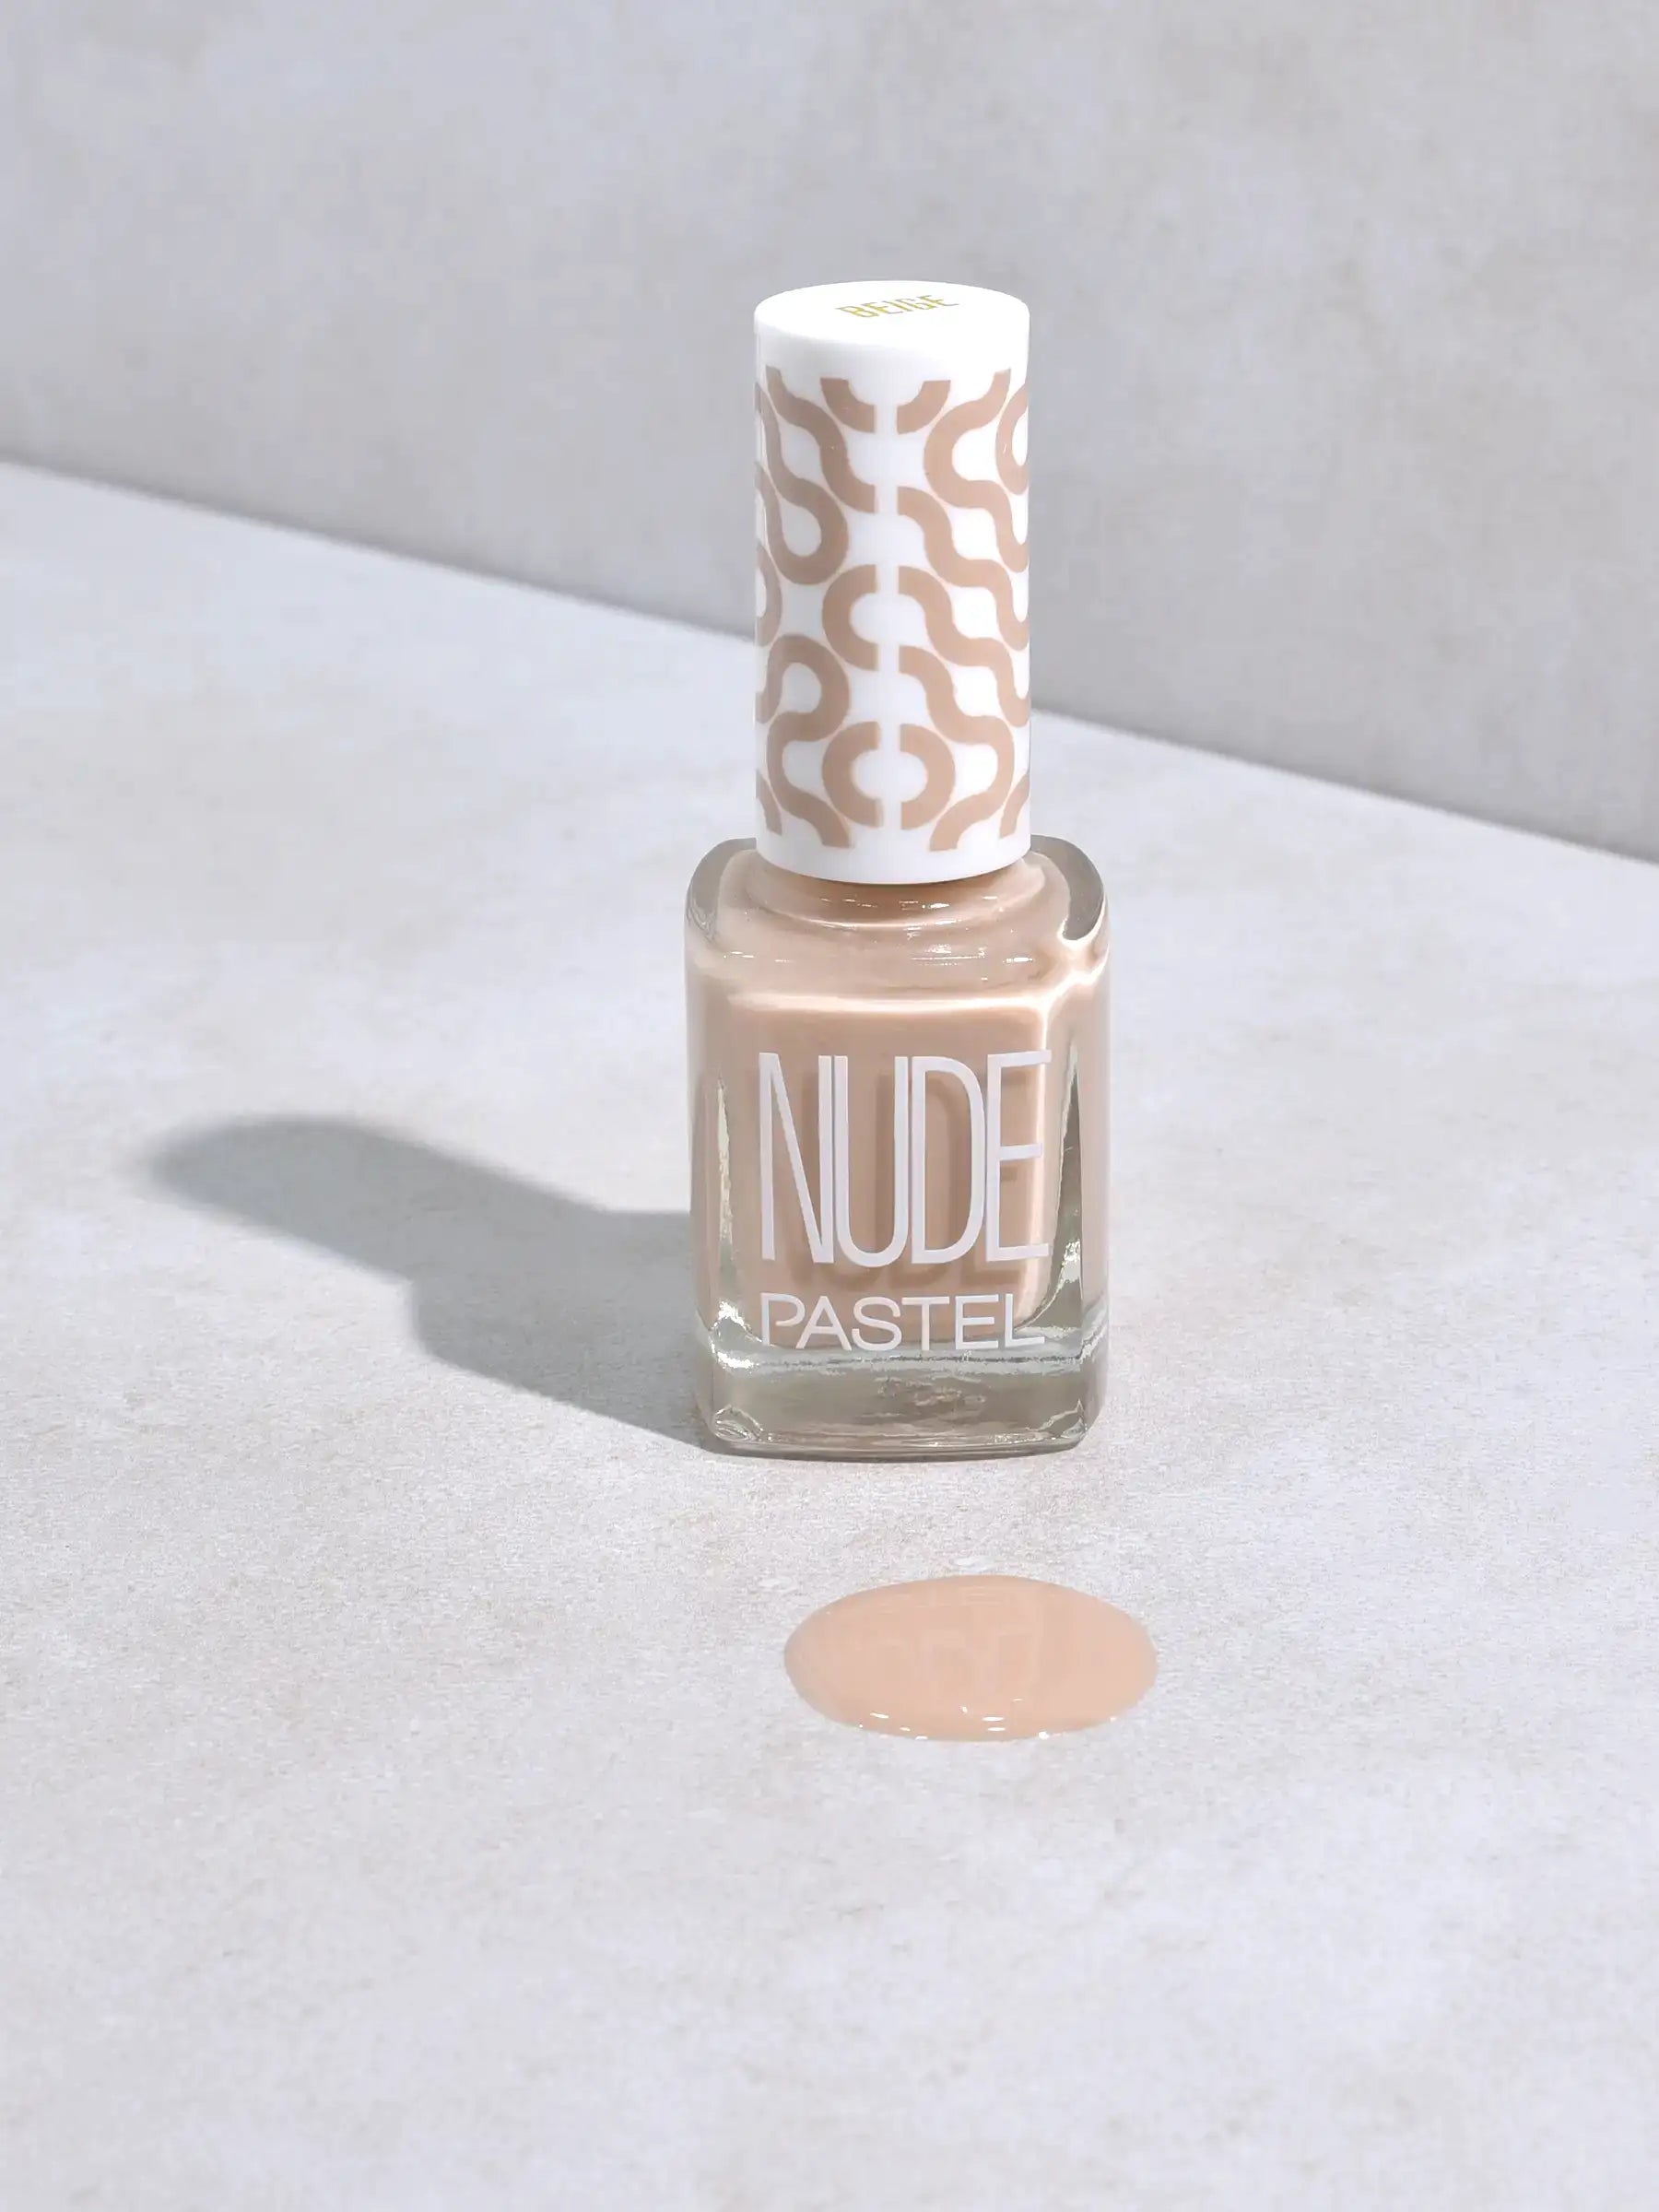 NUDE BY PASTEL NAIL POLISH 755 BEIGE